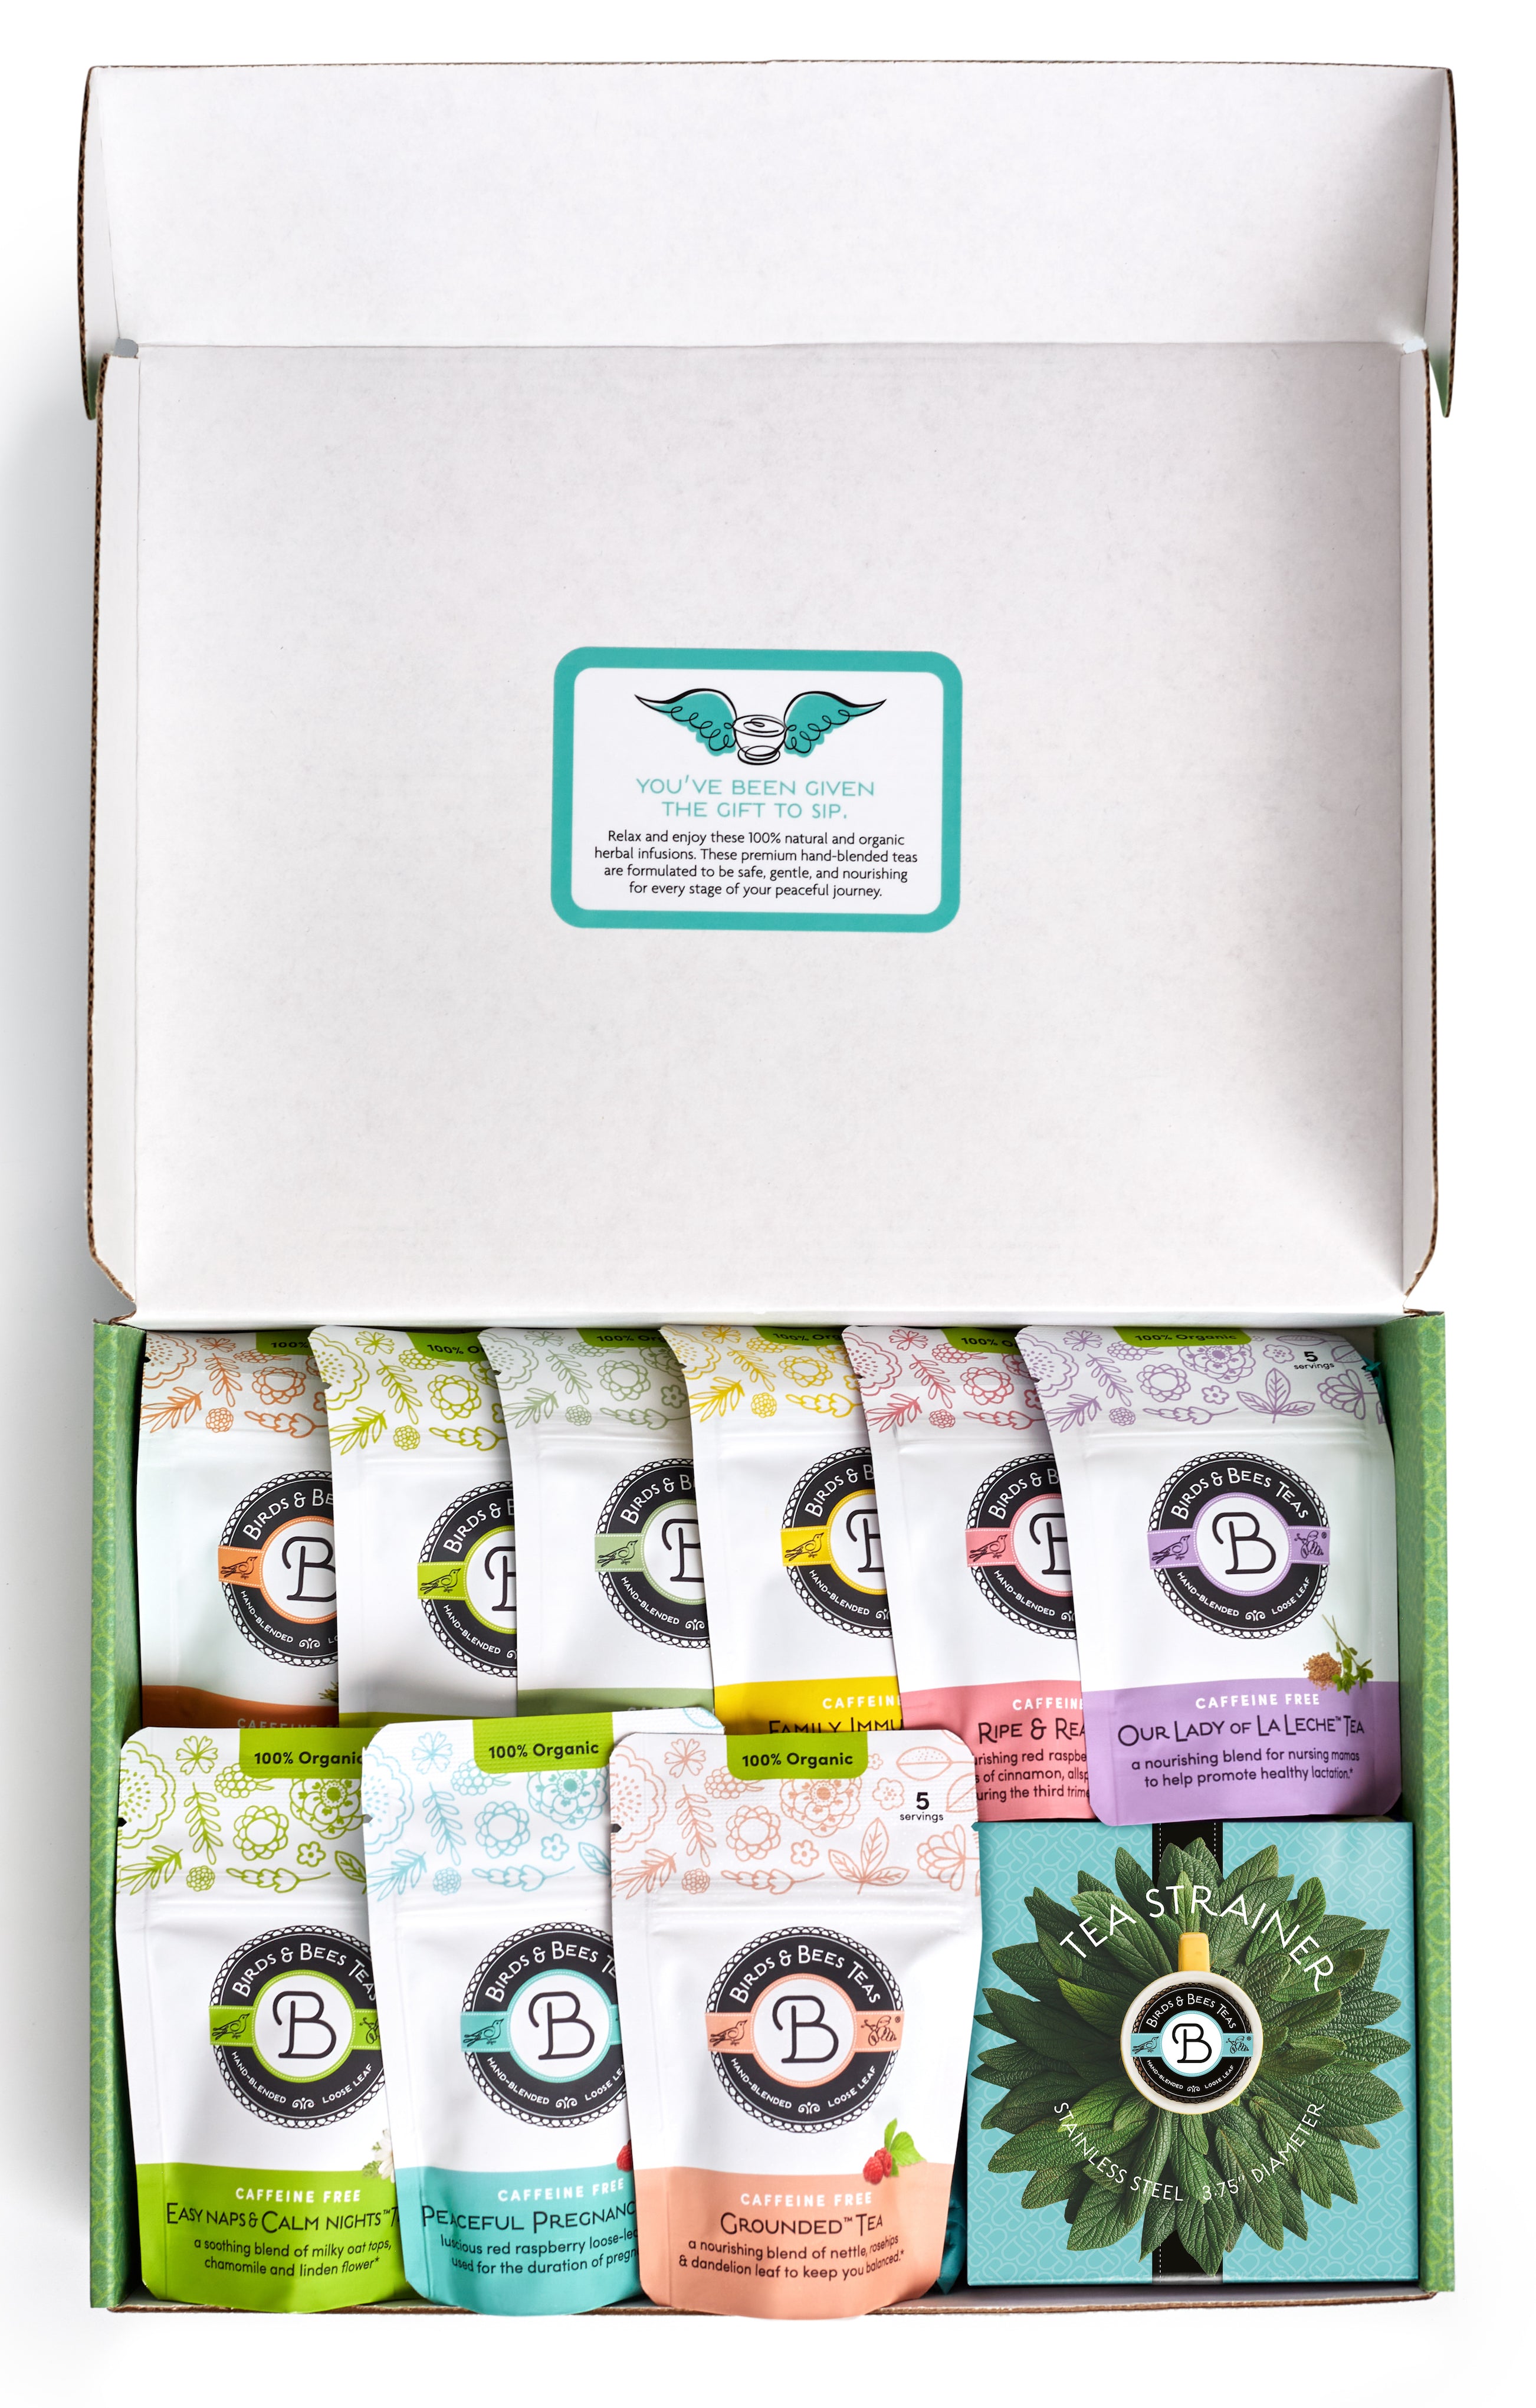 "Gifted to my expecting bestie. She loves teas in general and this pack made her feel so pampered! Packaging is adorable, I wrapped in a new pink silk robe and used the sash as the ribbon. It was absolutely perfect.  She said the teas were delicious!"